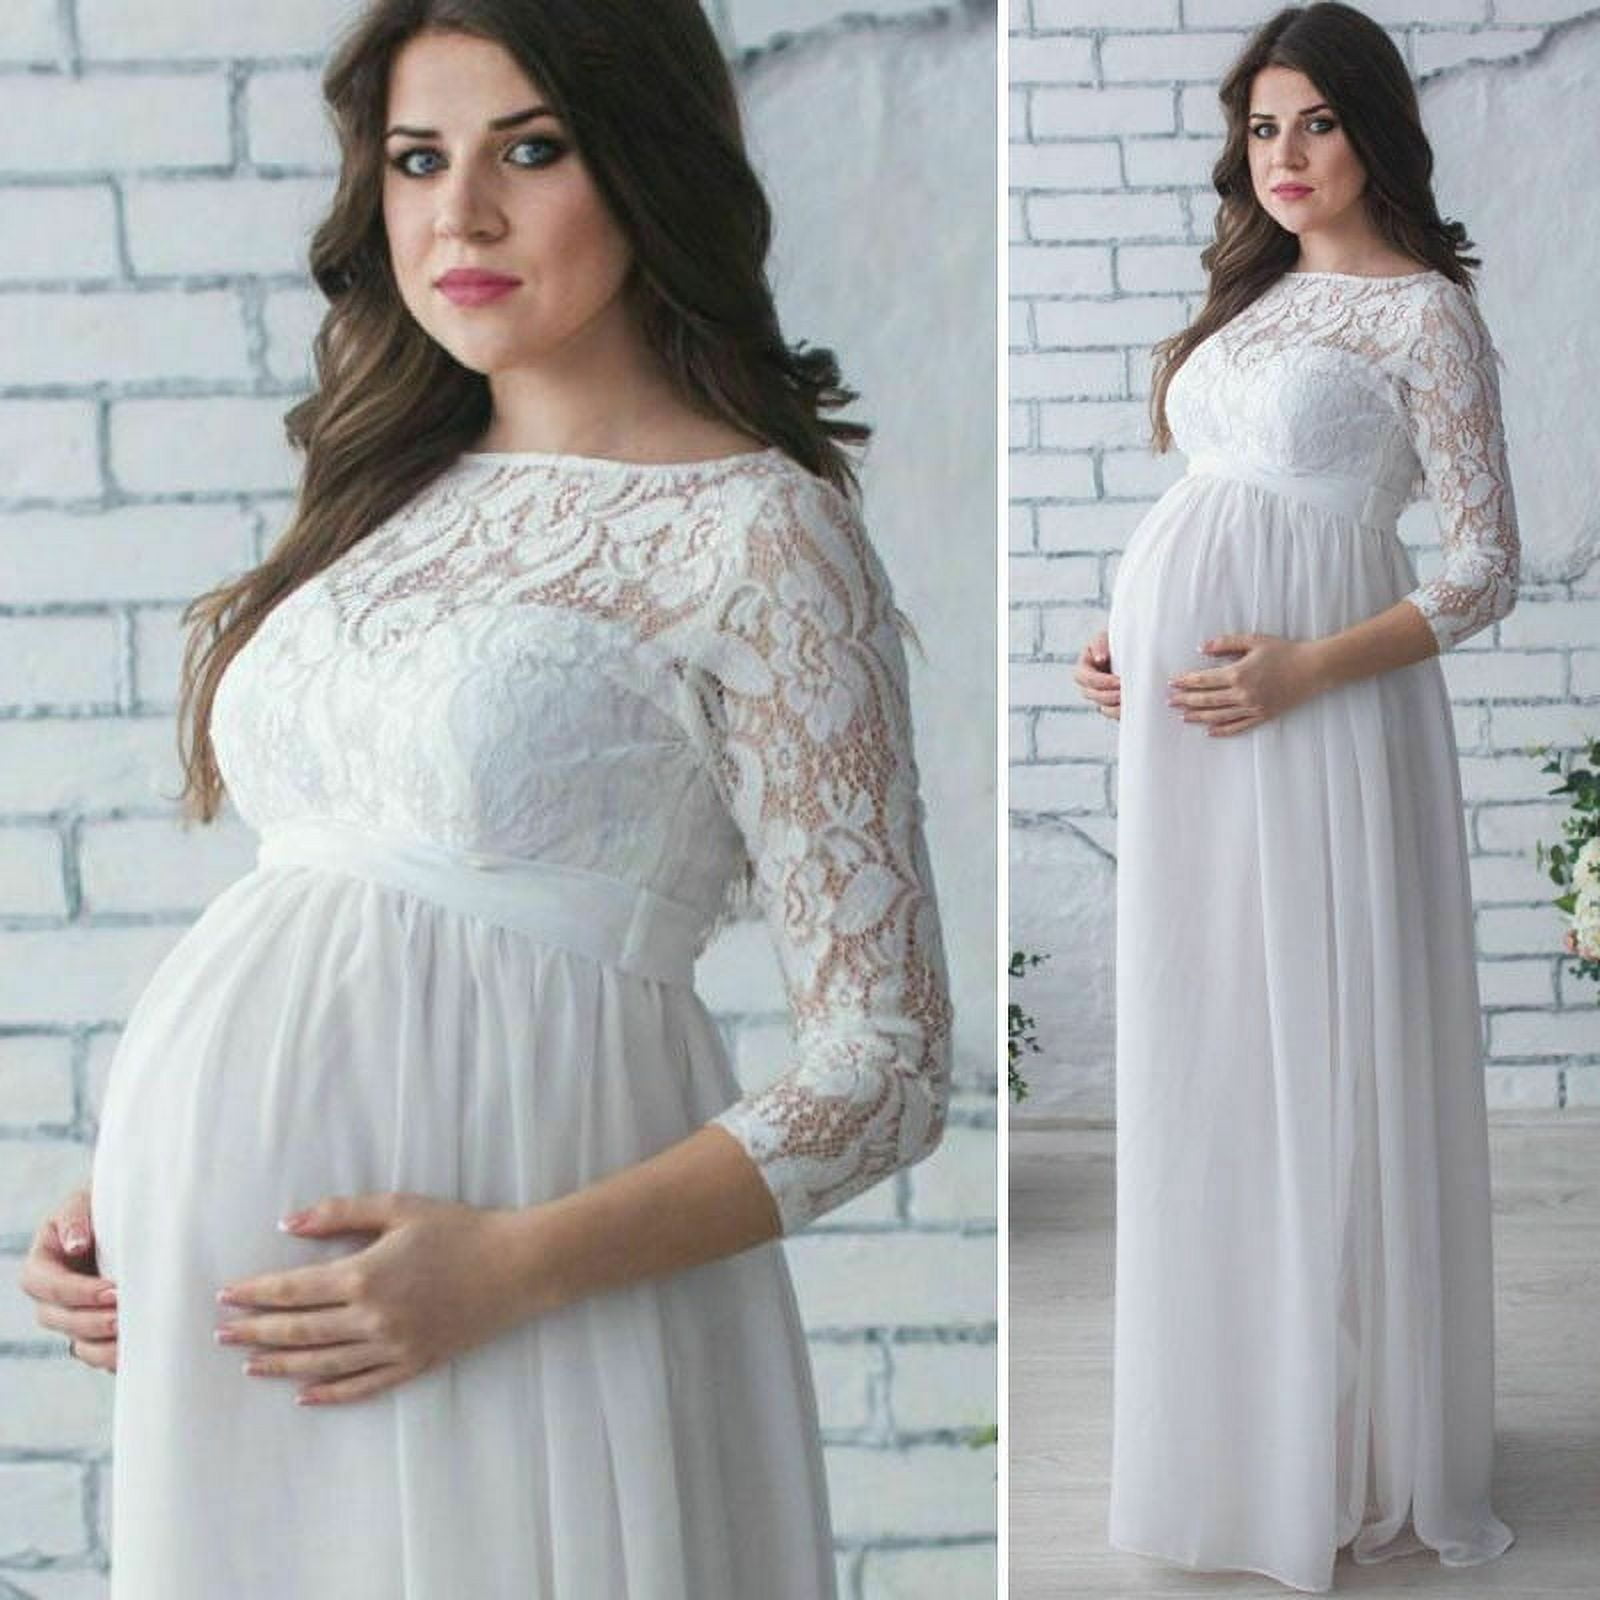 Musuos Pregnant Women Lace Dress, Maternity Maxi Gown, 3/4 Sleeve Party ...